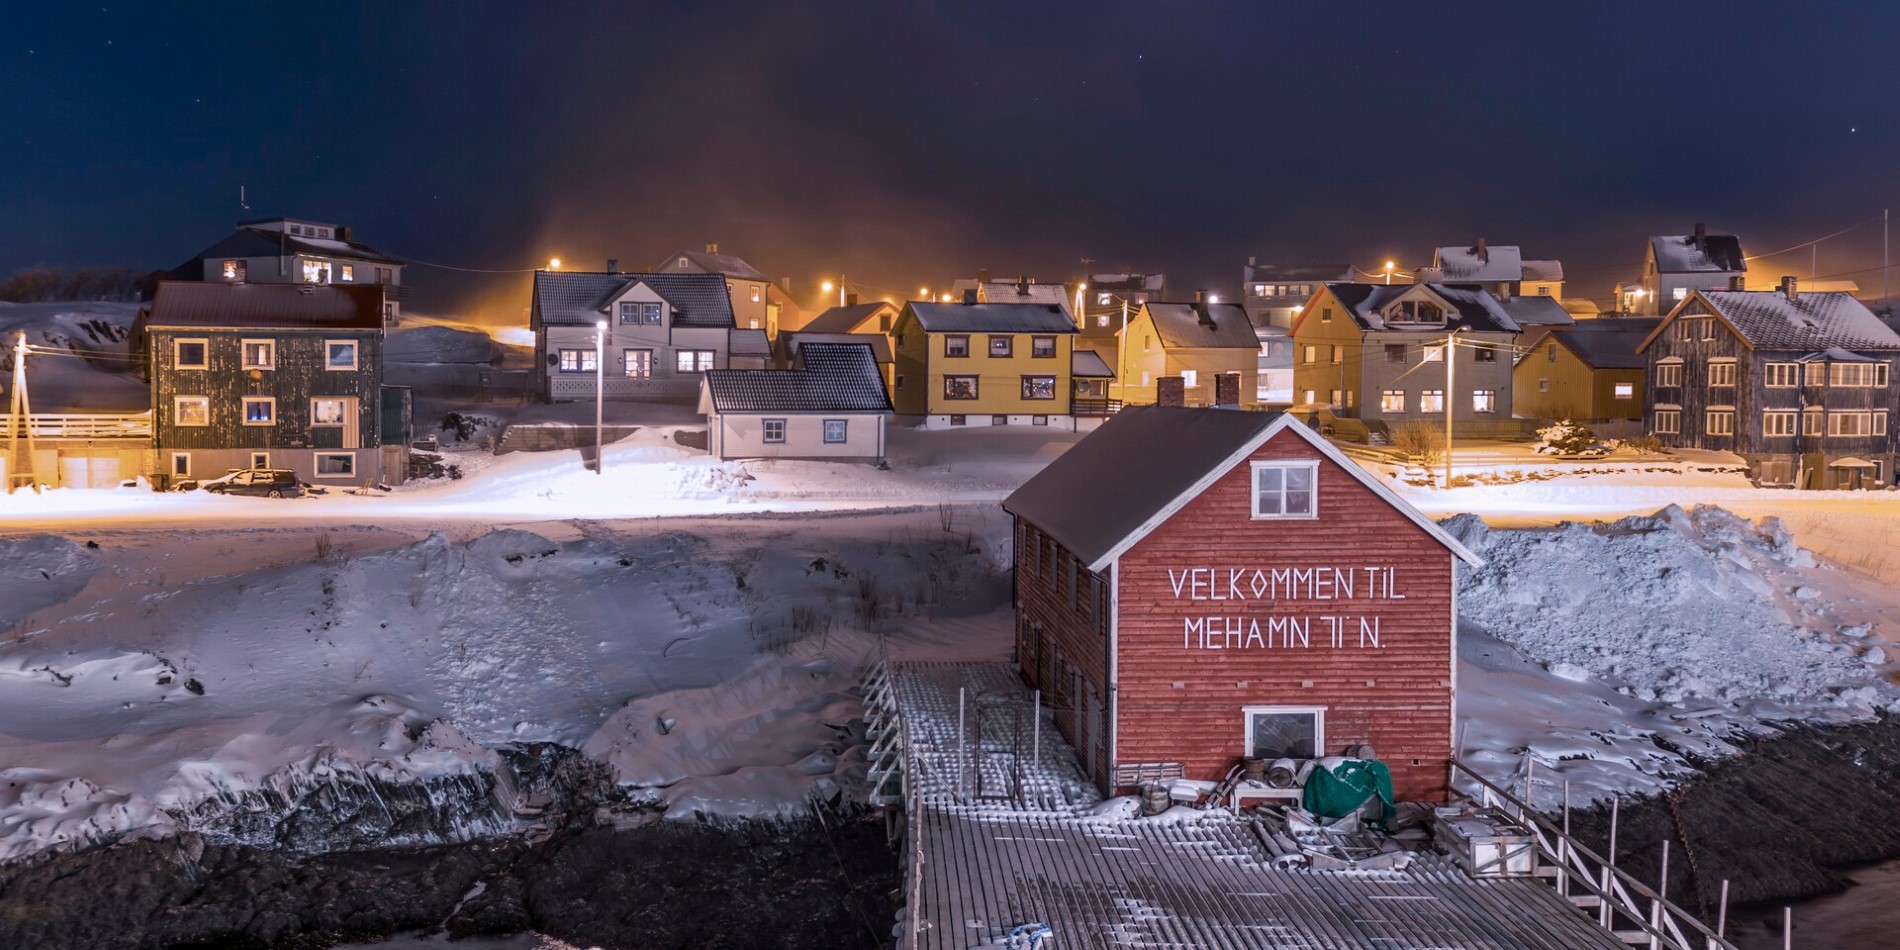 Nightfall over the small port town of Mehamn in Norway